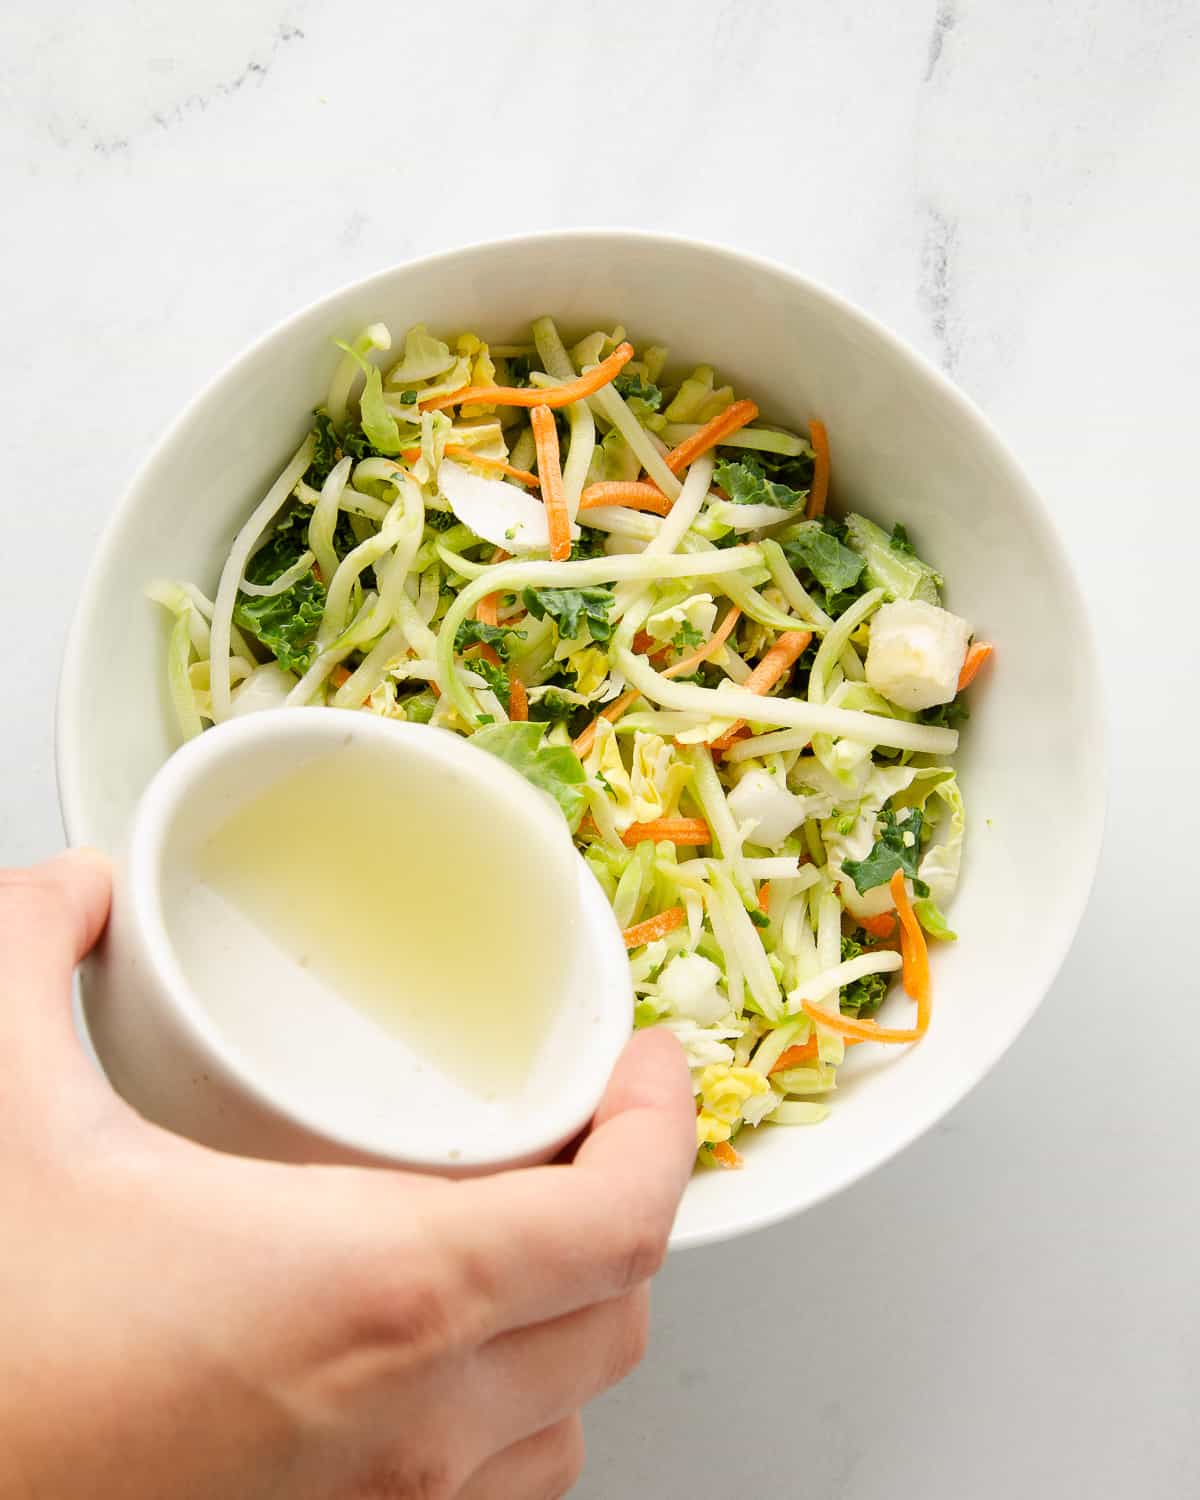 A hand pouring lime juice onto slaw mix in a white bowl.